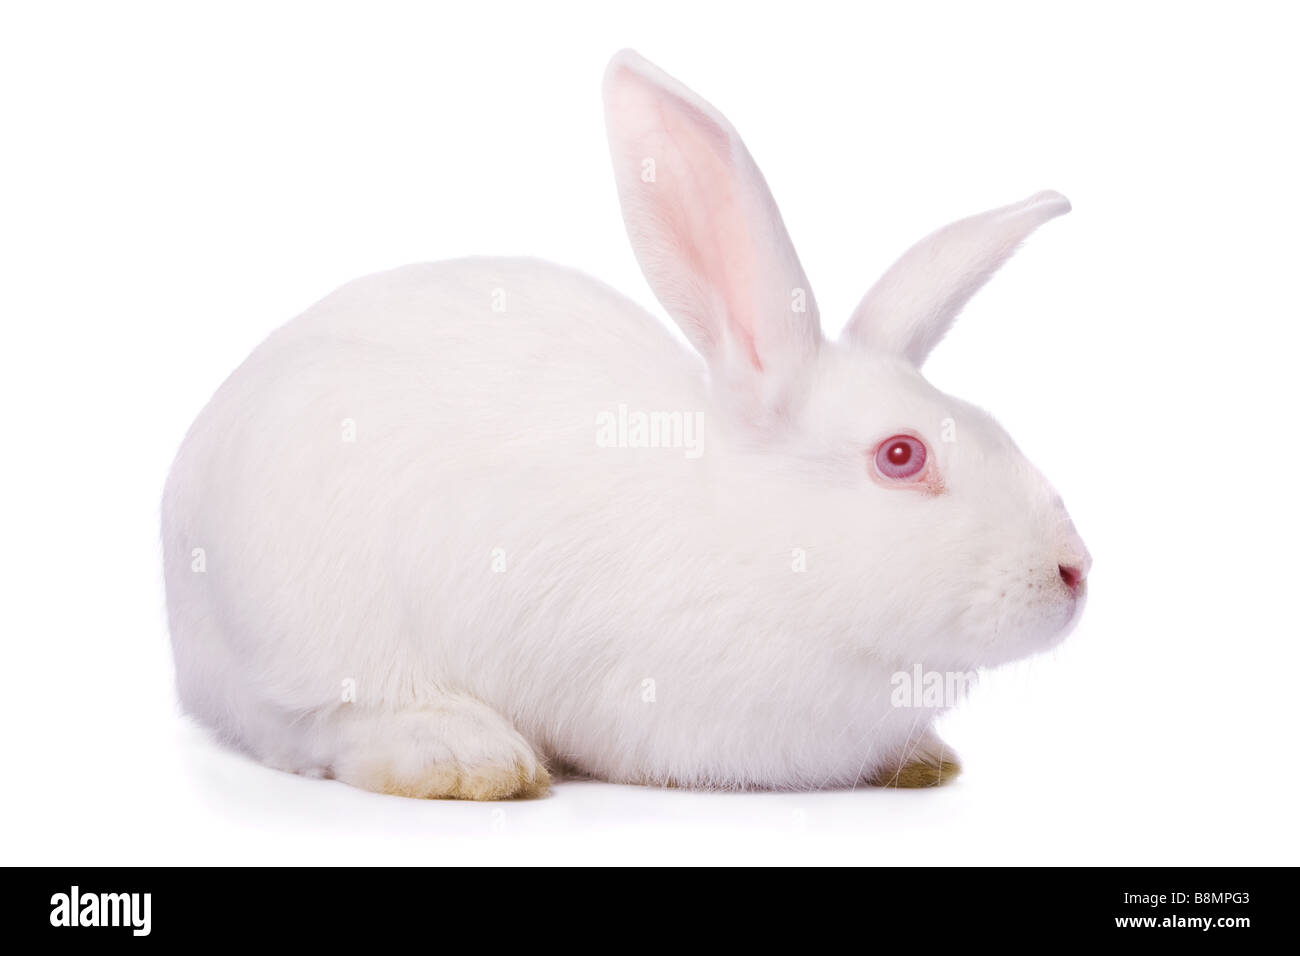 Timid young white rabbit isolated on white background Stock Photo